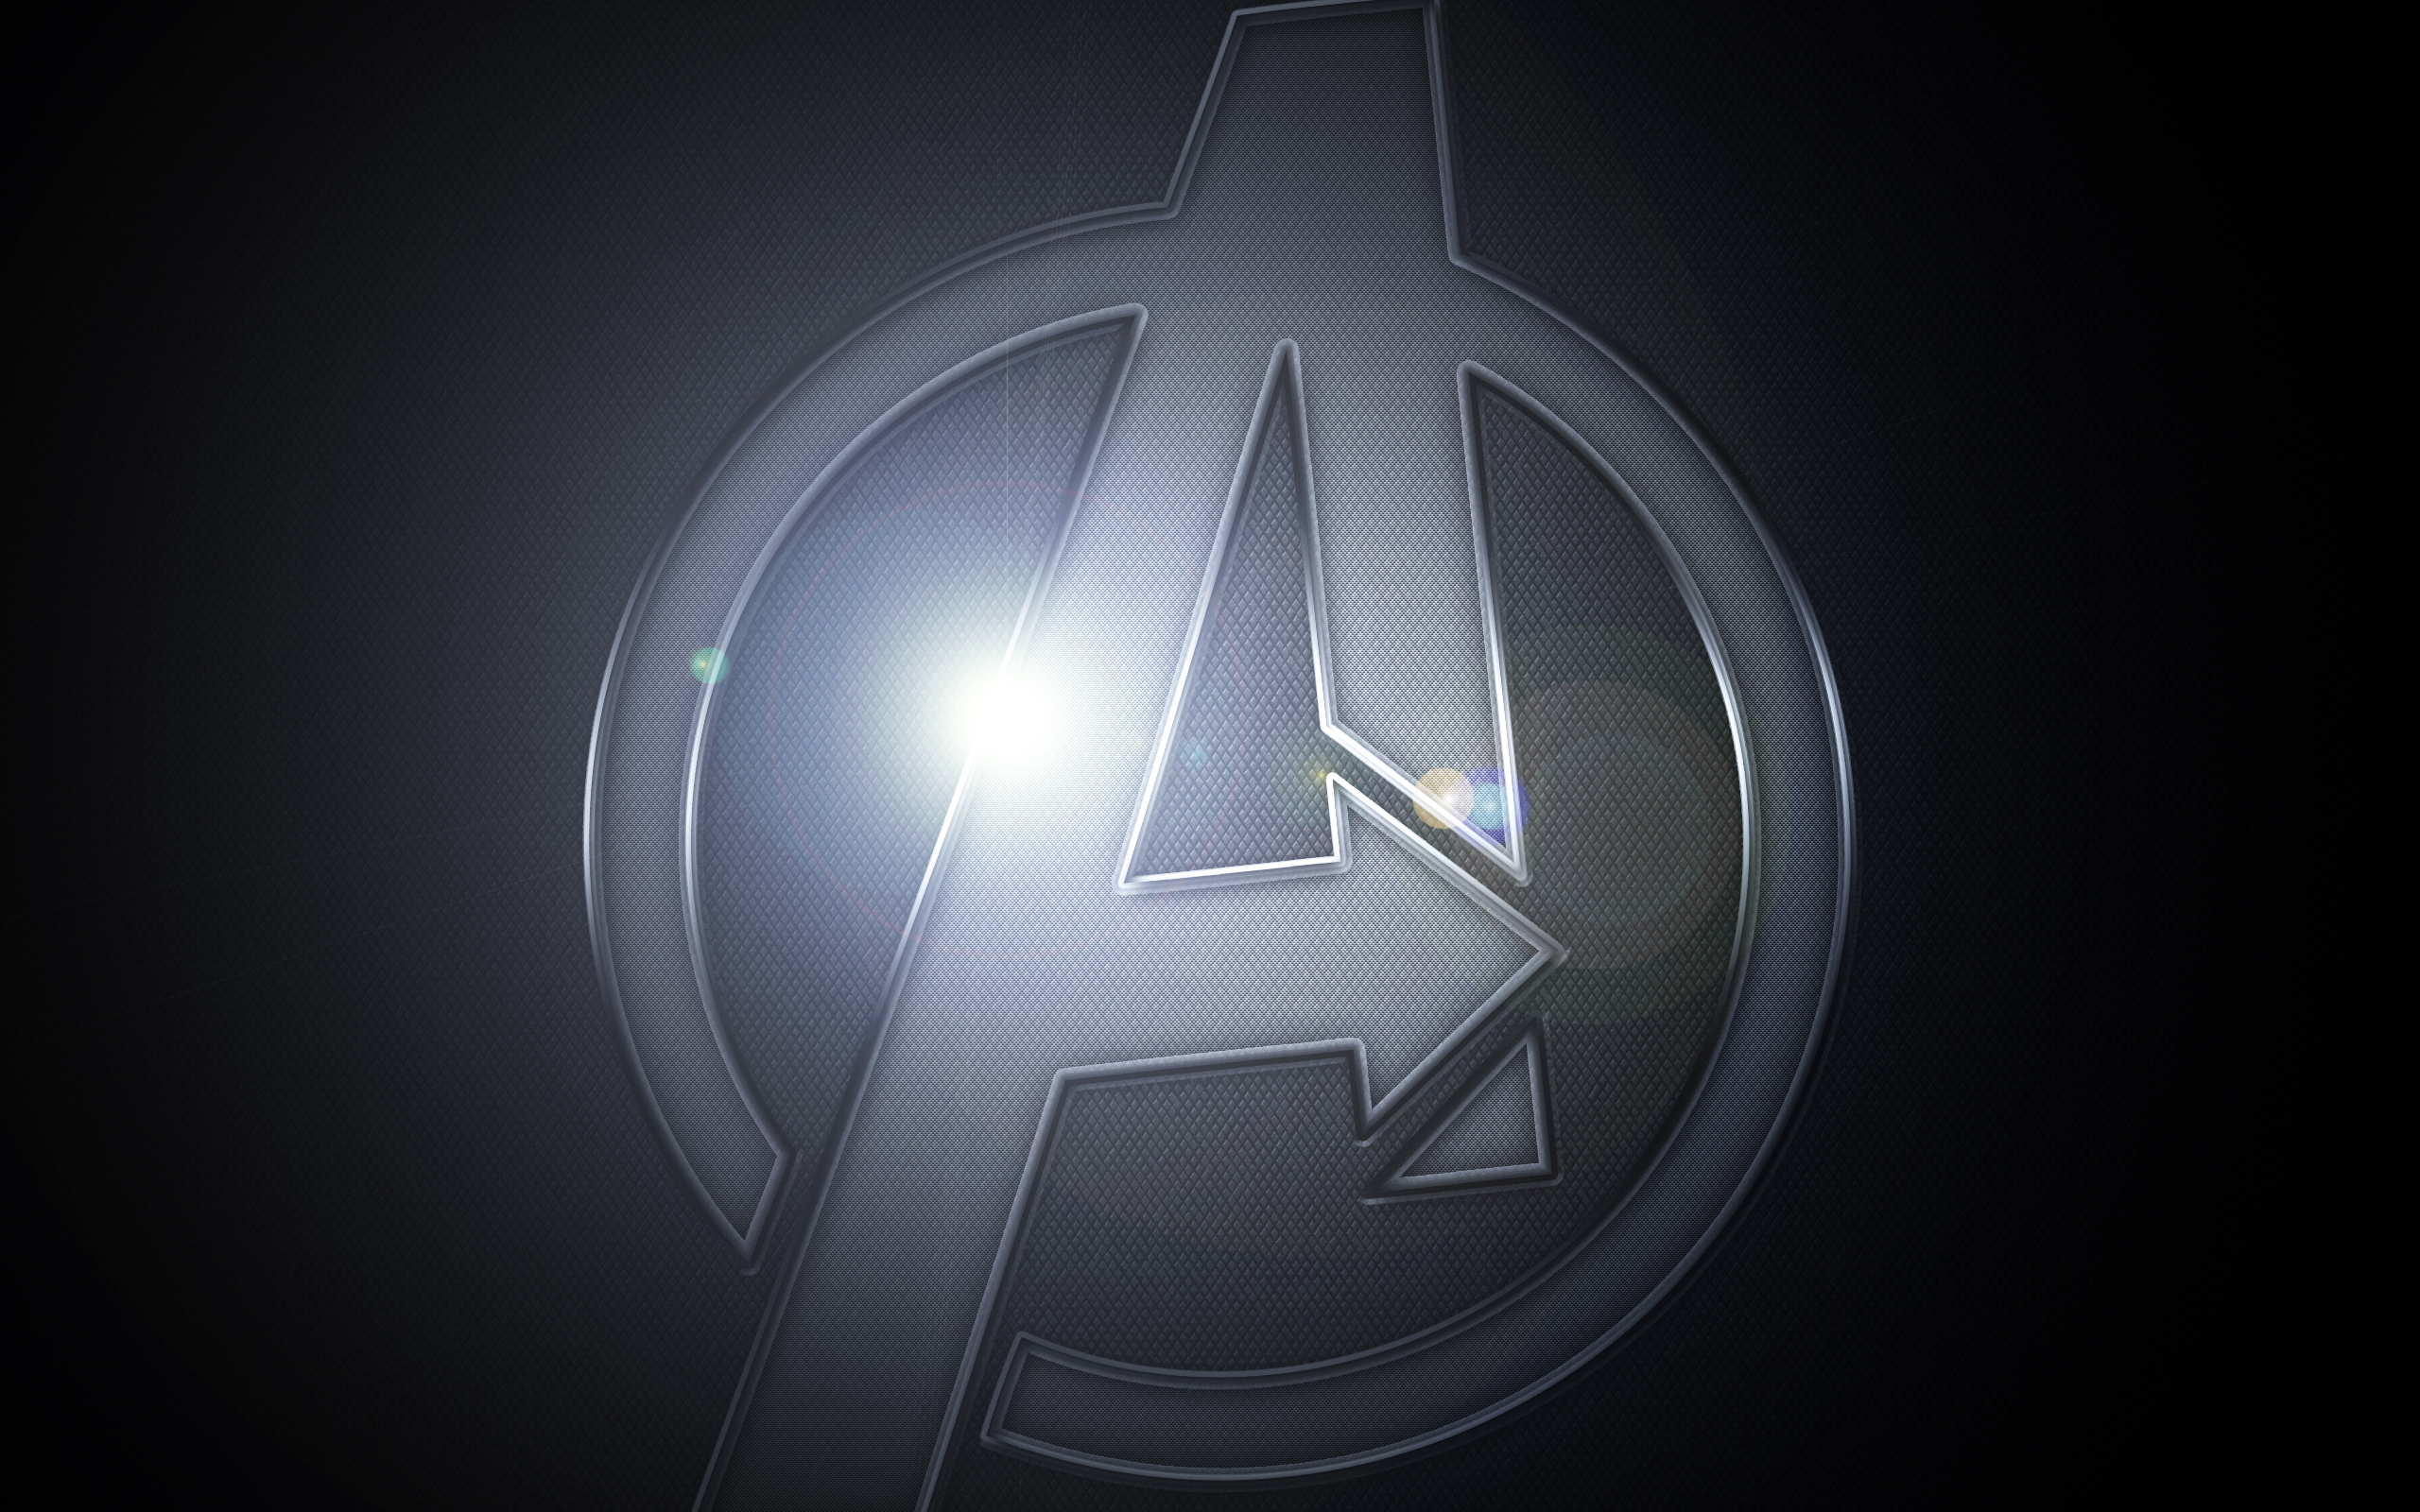 Free Download The Avengers Movie Wallpapers Hd Wallpapers 2560x1600 For Your Desktop Mobile Tablet Explore 50 Avengers Movie Wallpaper The Avengers Wallpaper Avengers Cell Phone Wallpaper